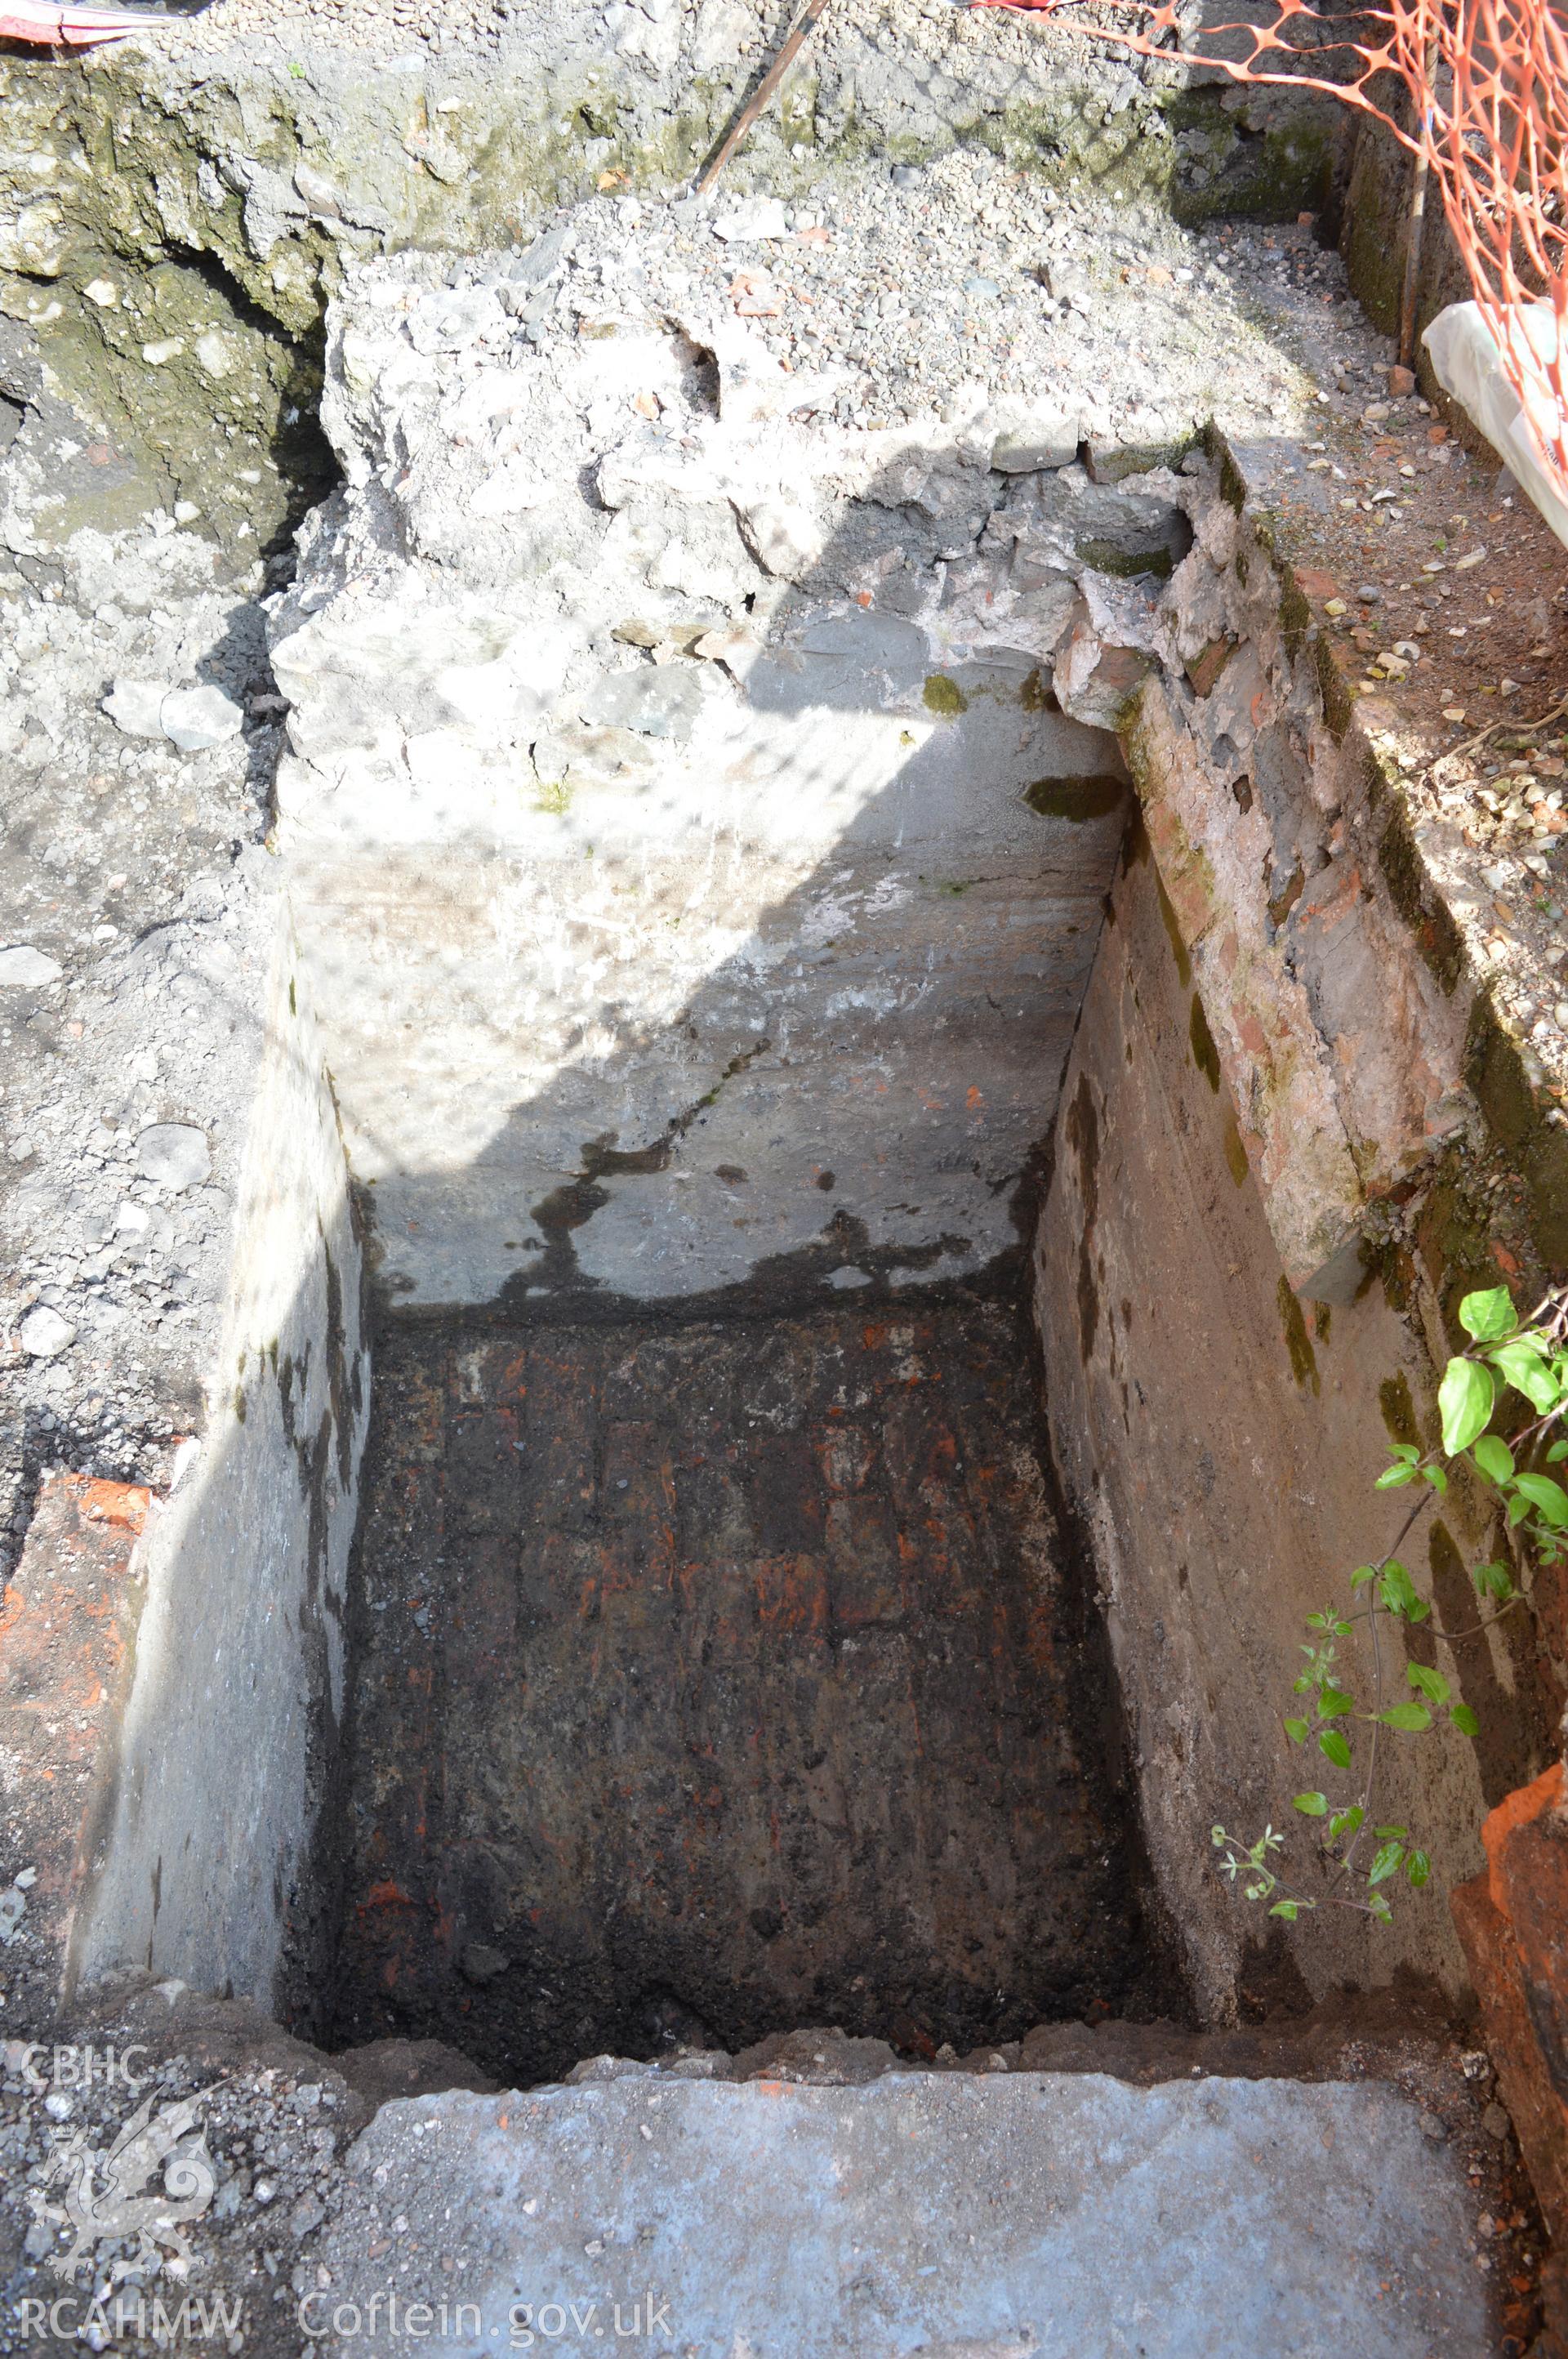 Digital colour photograph showing view from the east showing partially excavated cellar void. Photographed as part of CPAT Project 2351: 2 Severn Street, Welshpool, Powys - Archaeological Watching Brief, 2019. Report no. 1663.